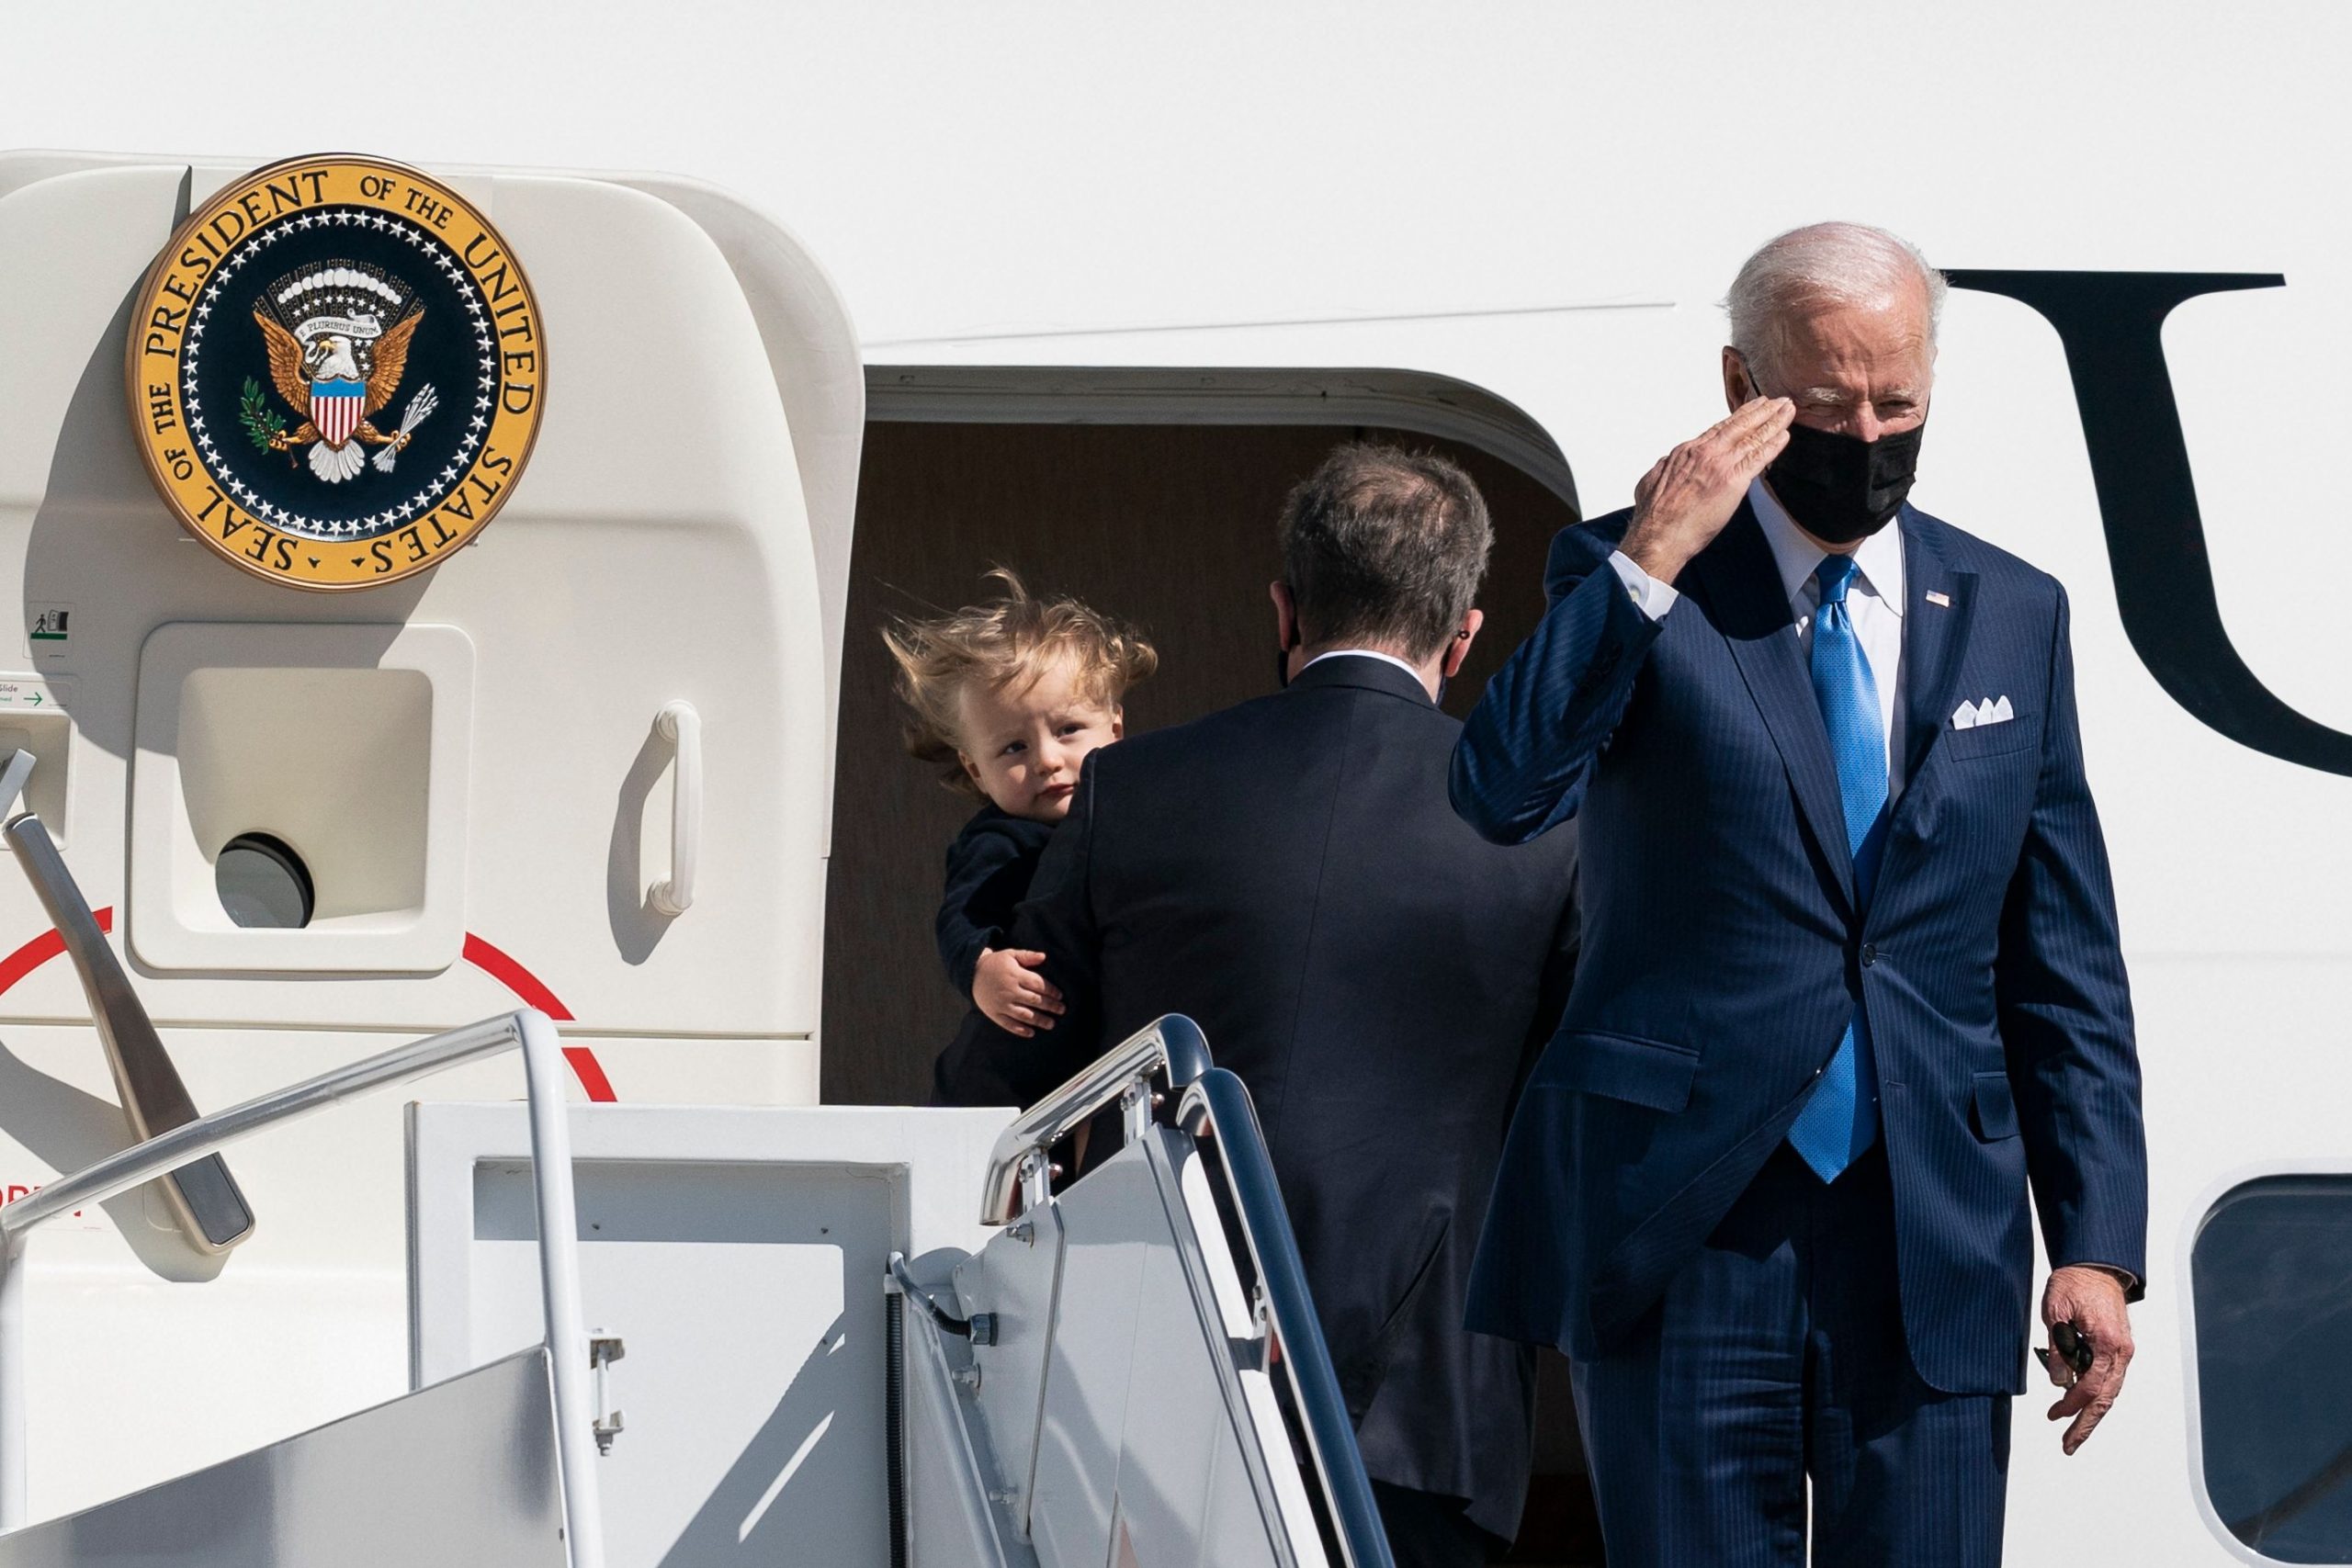 Biden announces additional measures to address anti-Asian violence